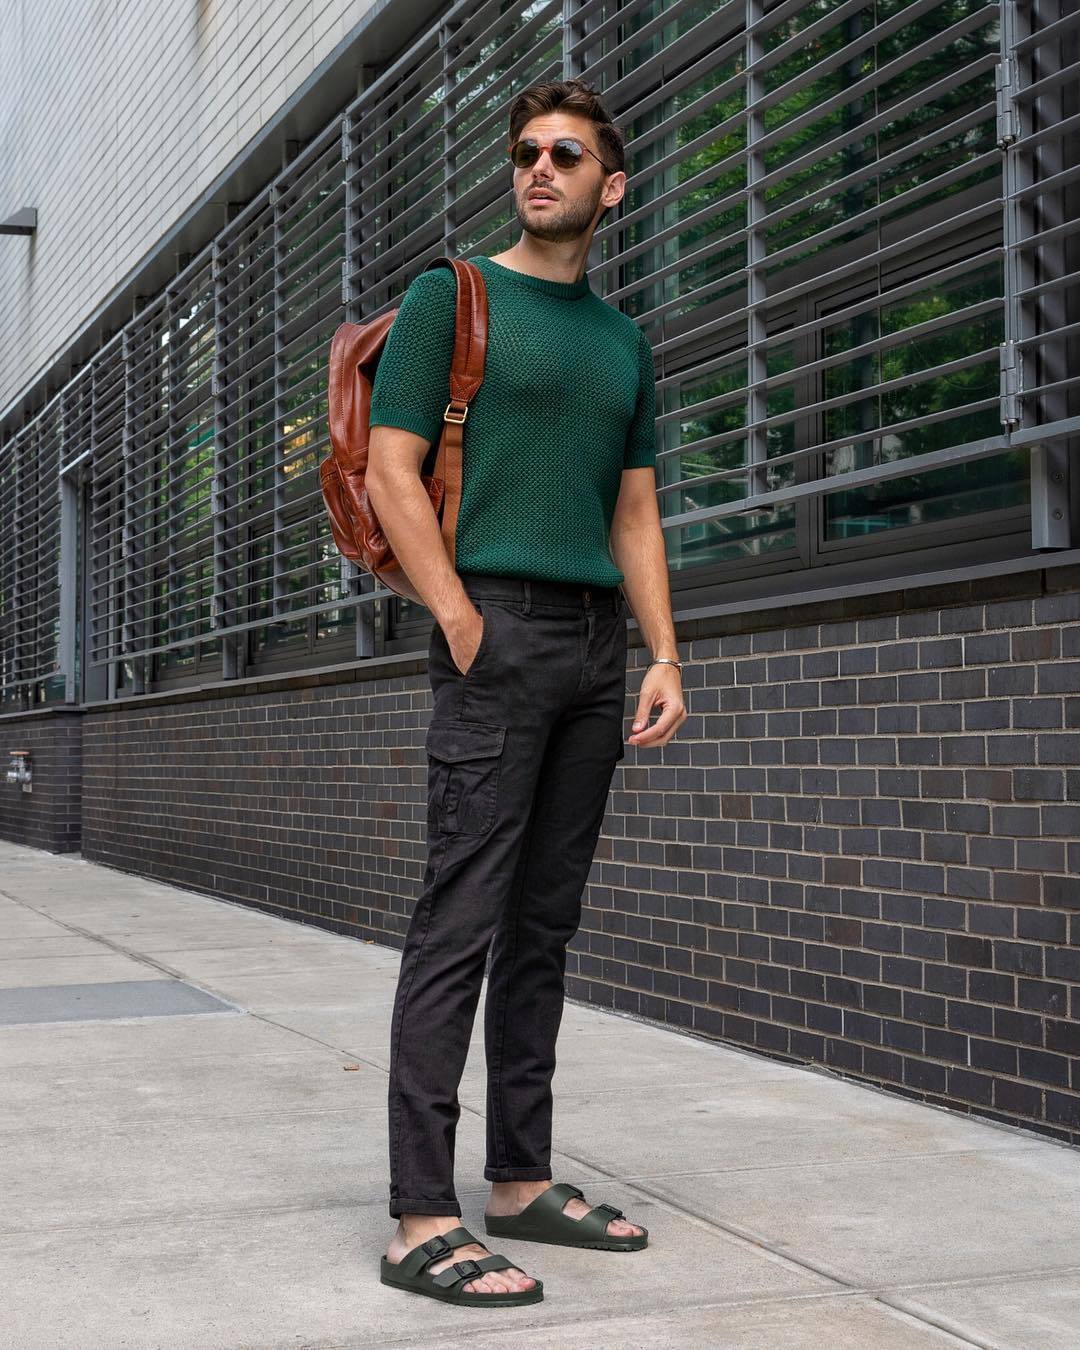 Will a green shirt go with black pants? - Quora